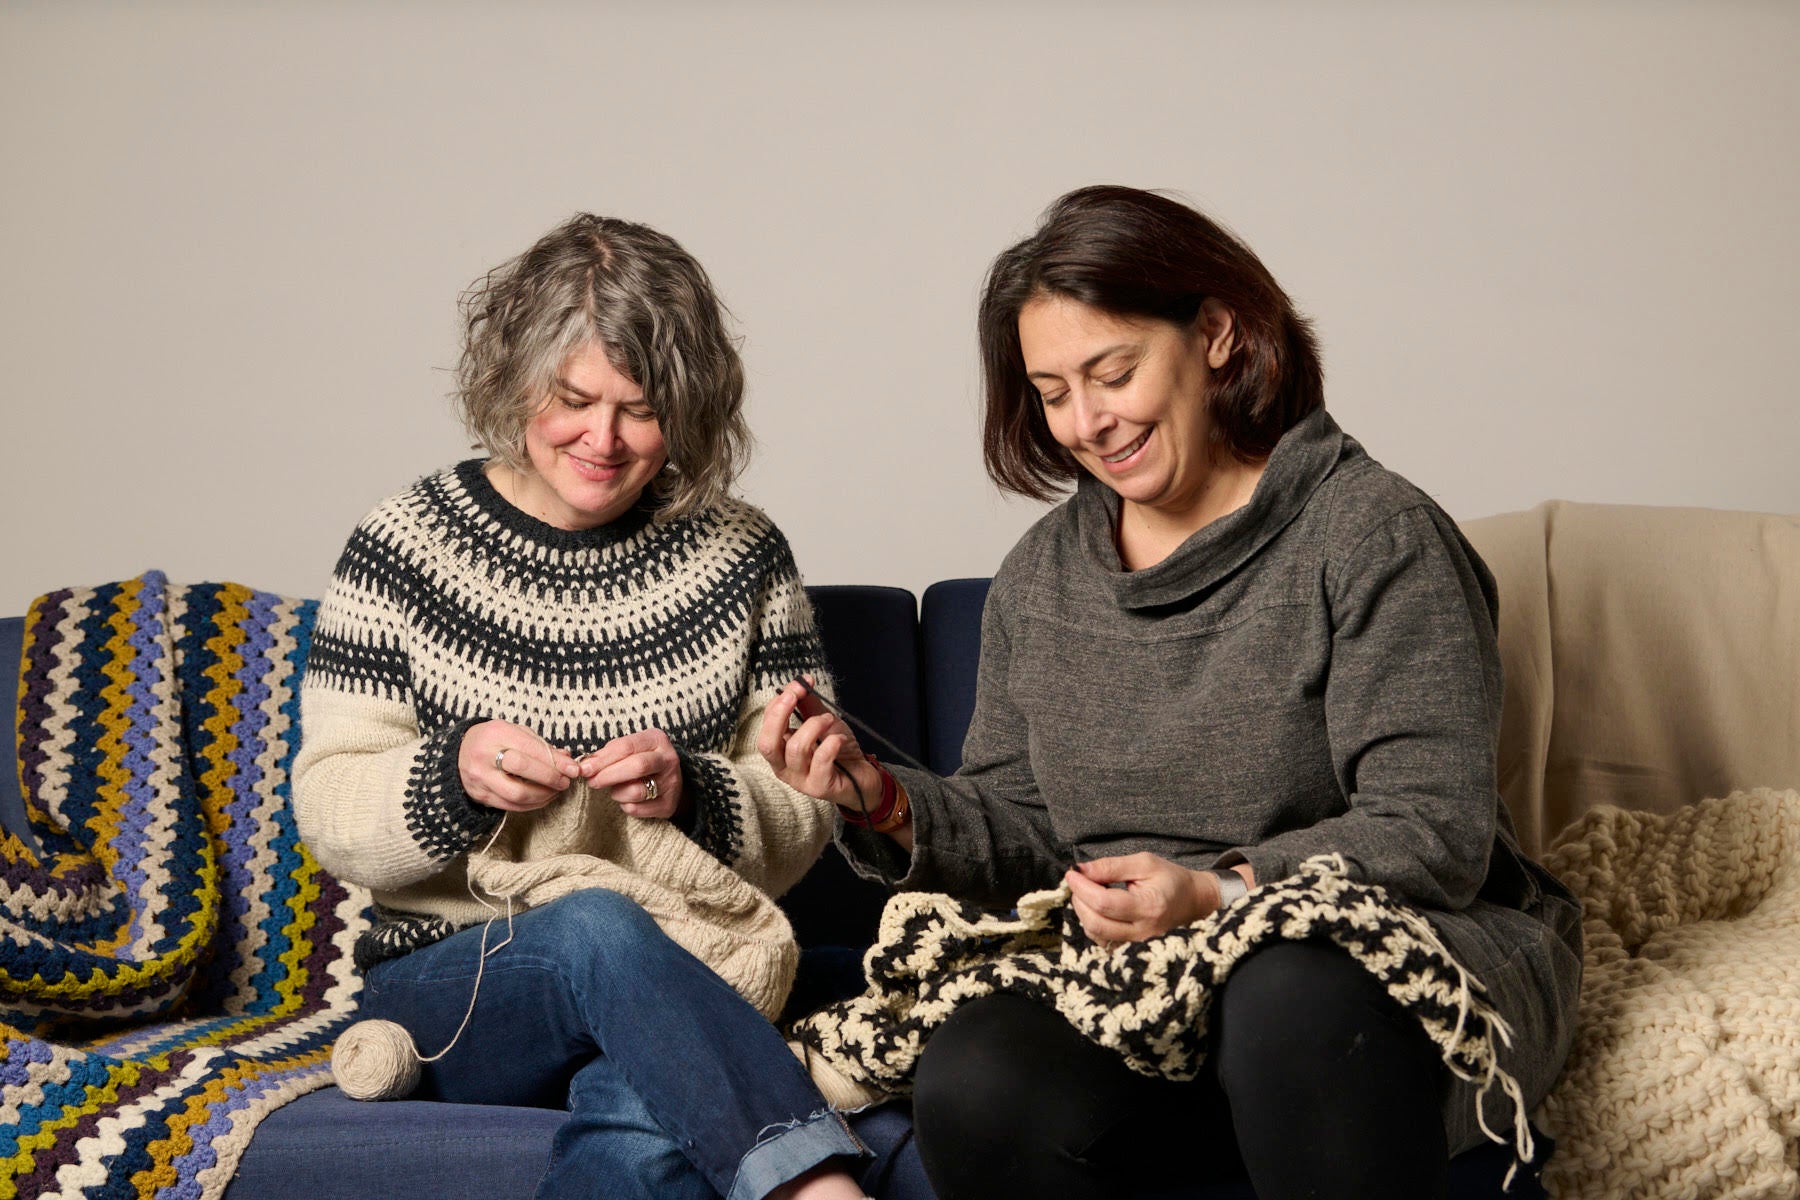 Loose Ends founders Masey Kaplan and Jen Simonic knit together